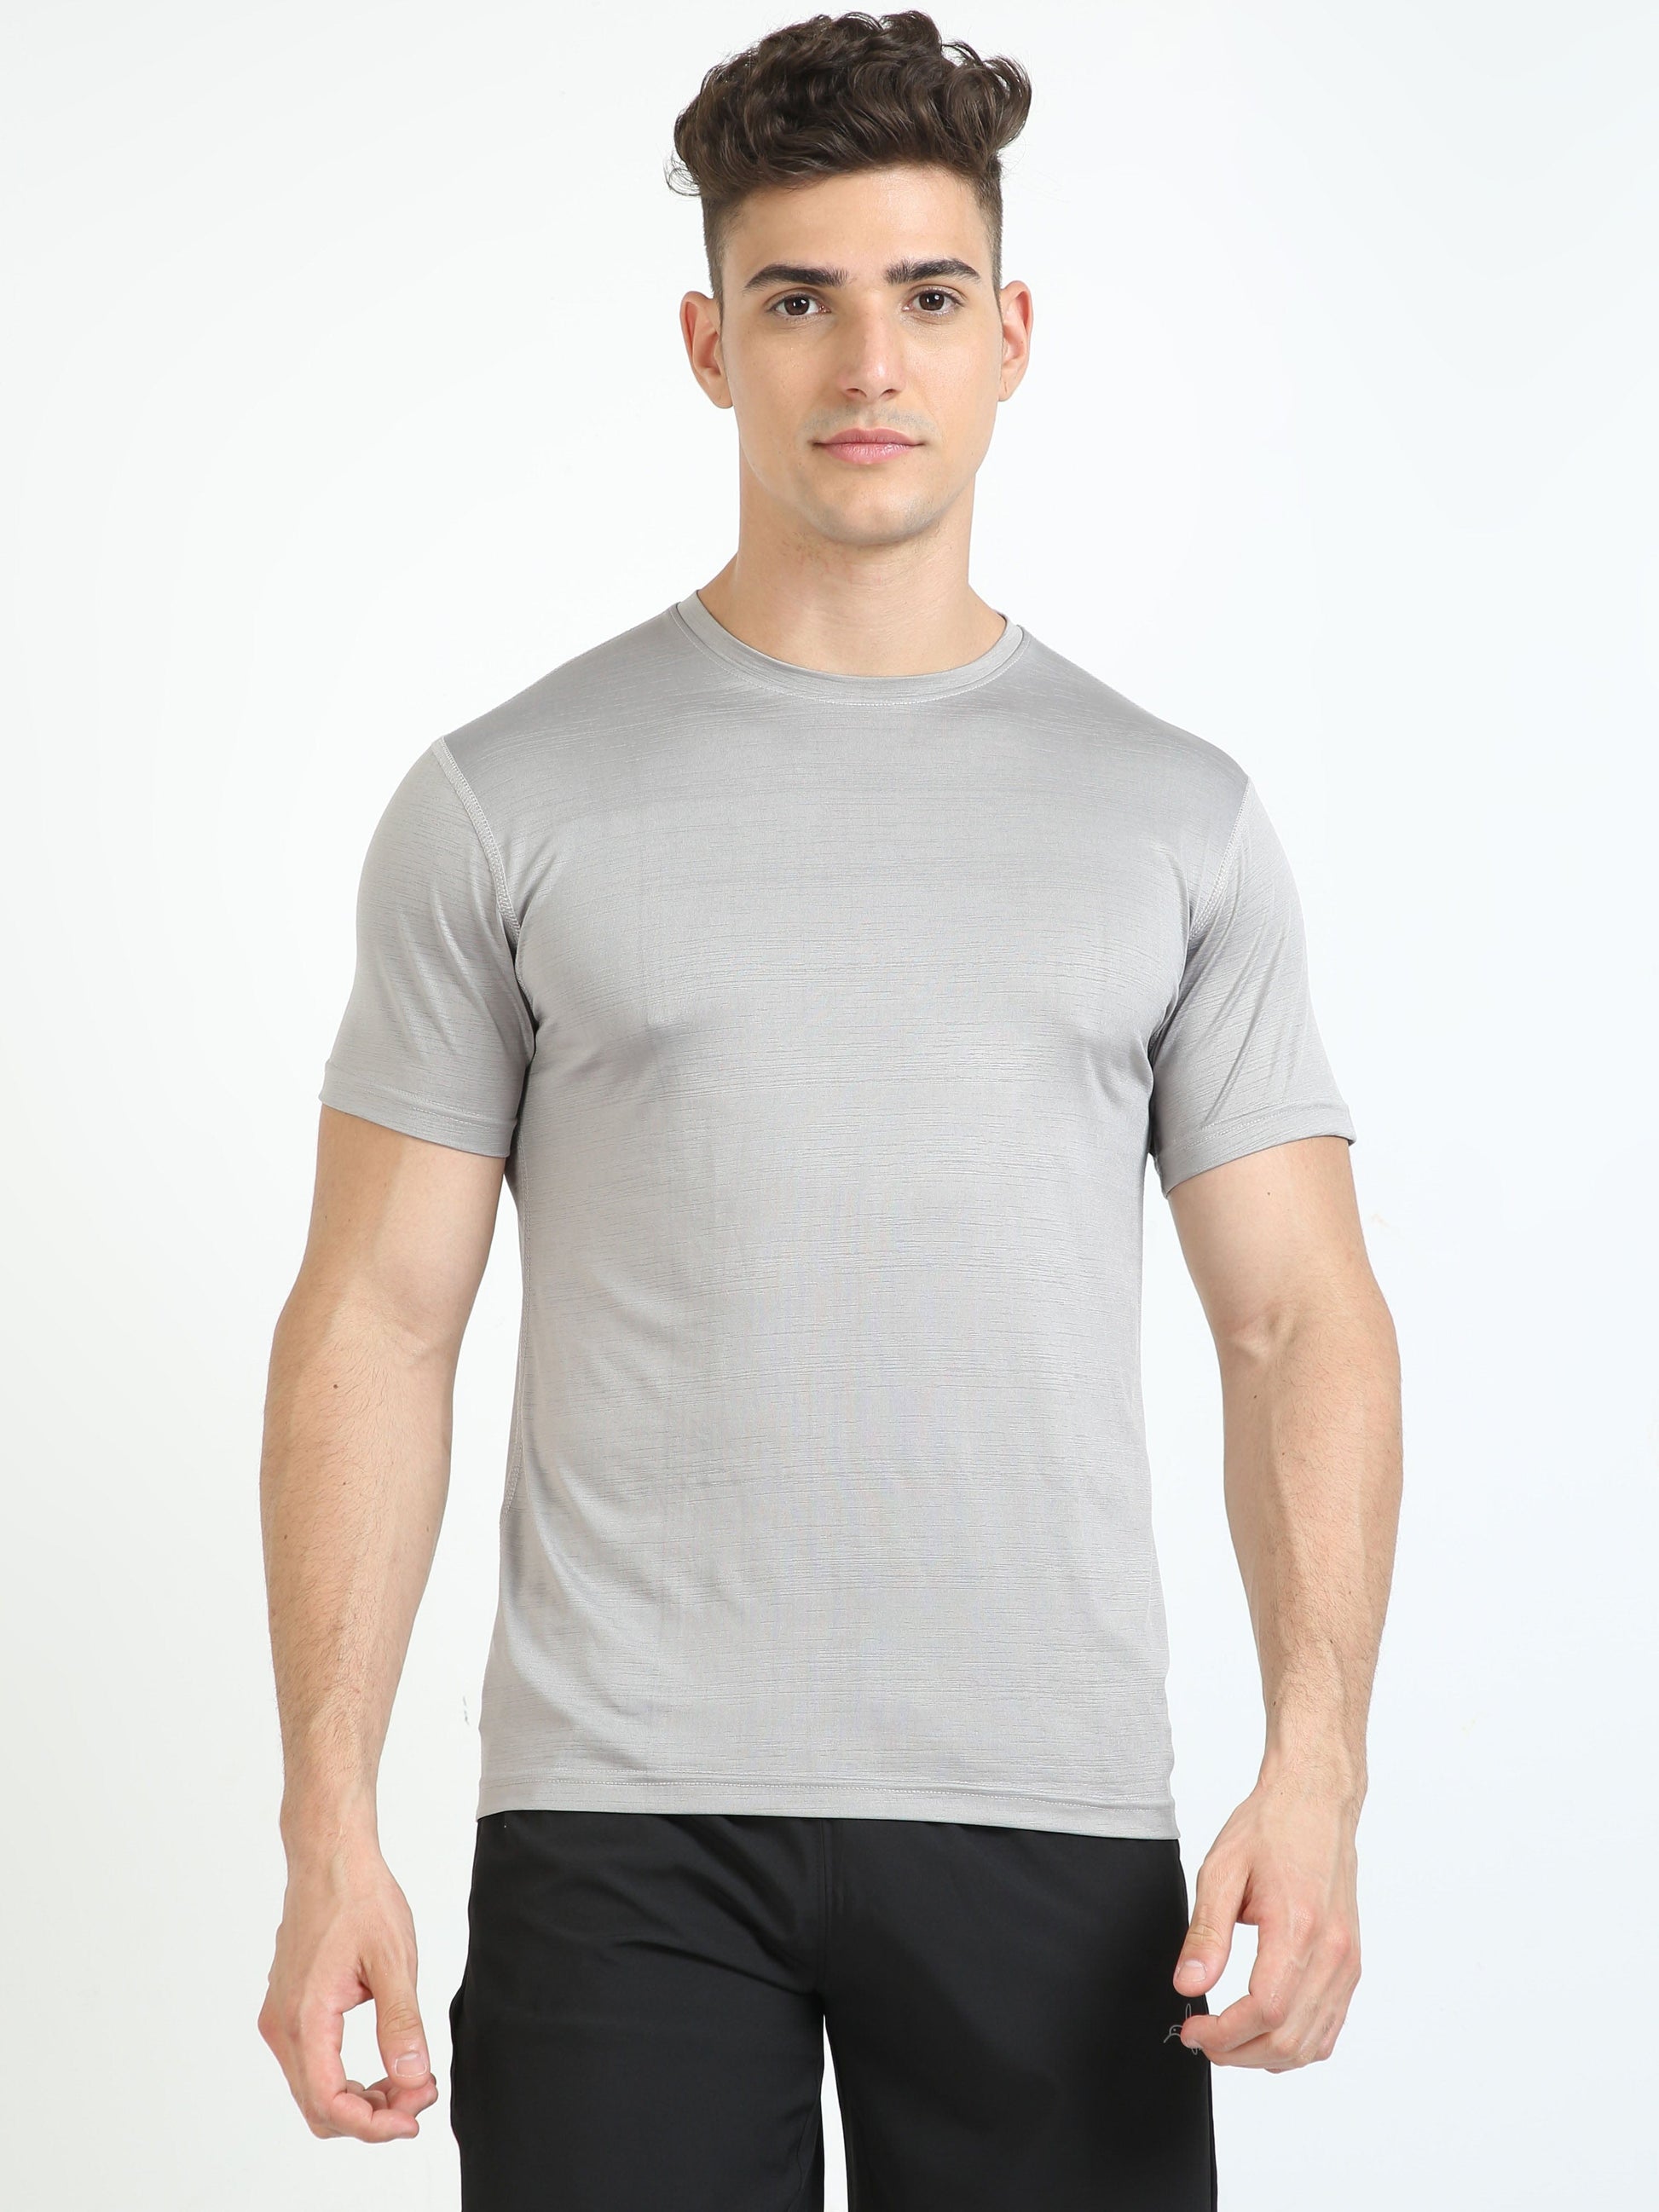 Quill Grey Sports Tee